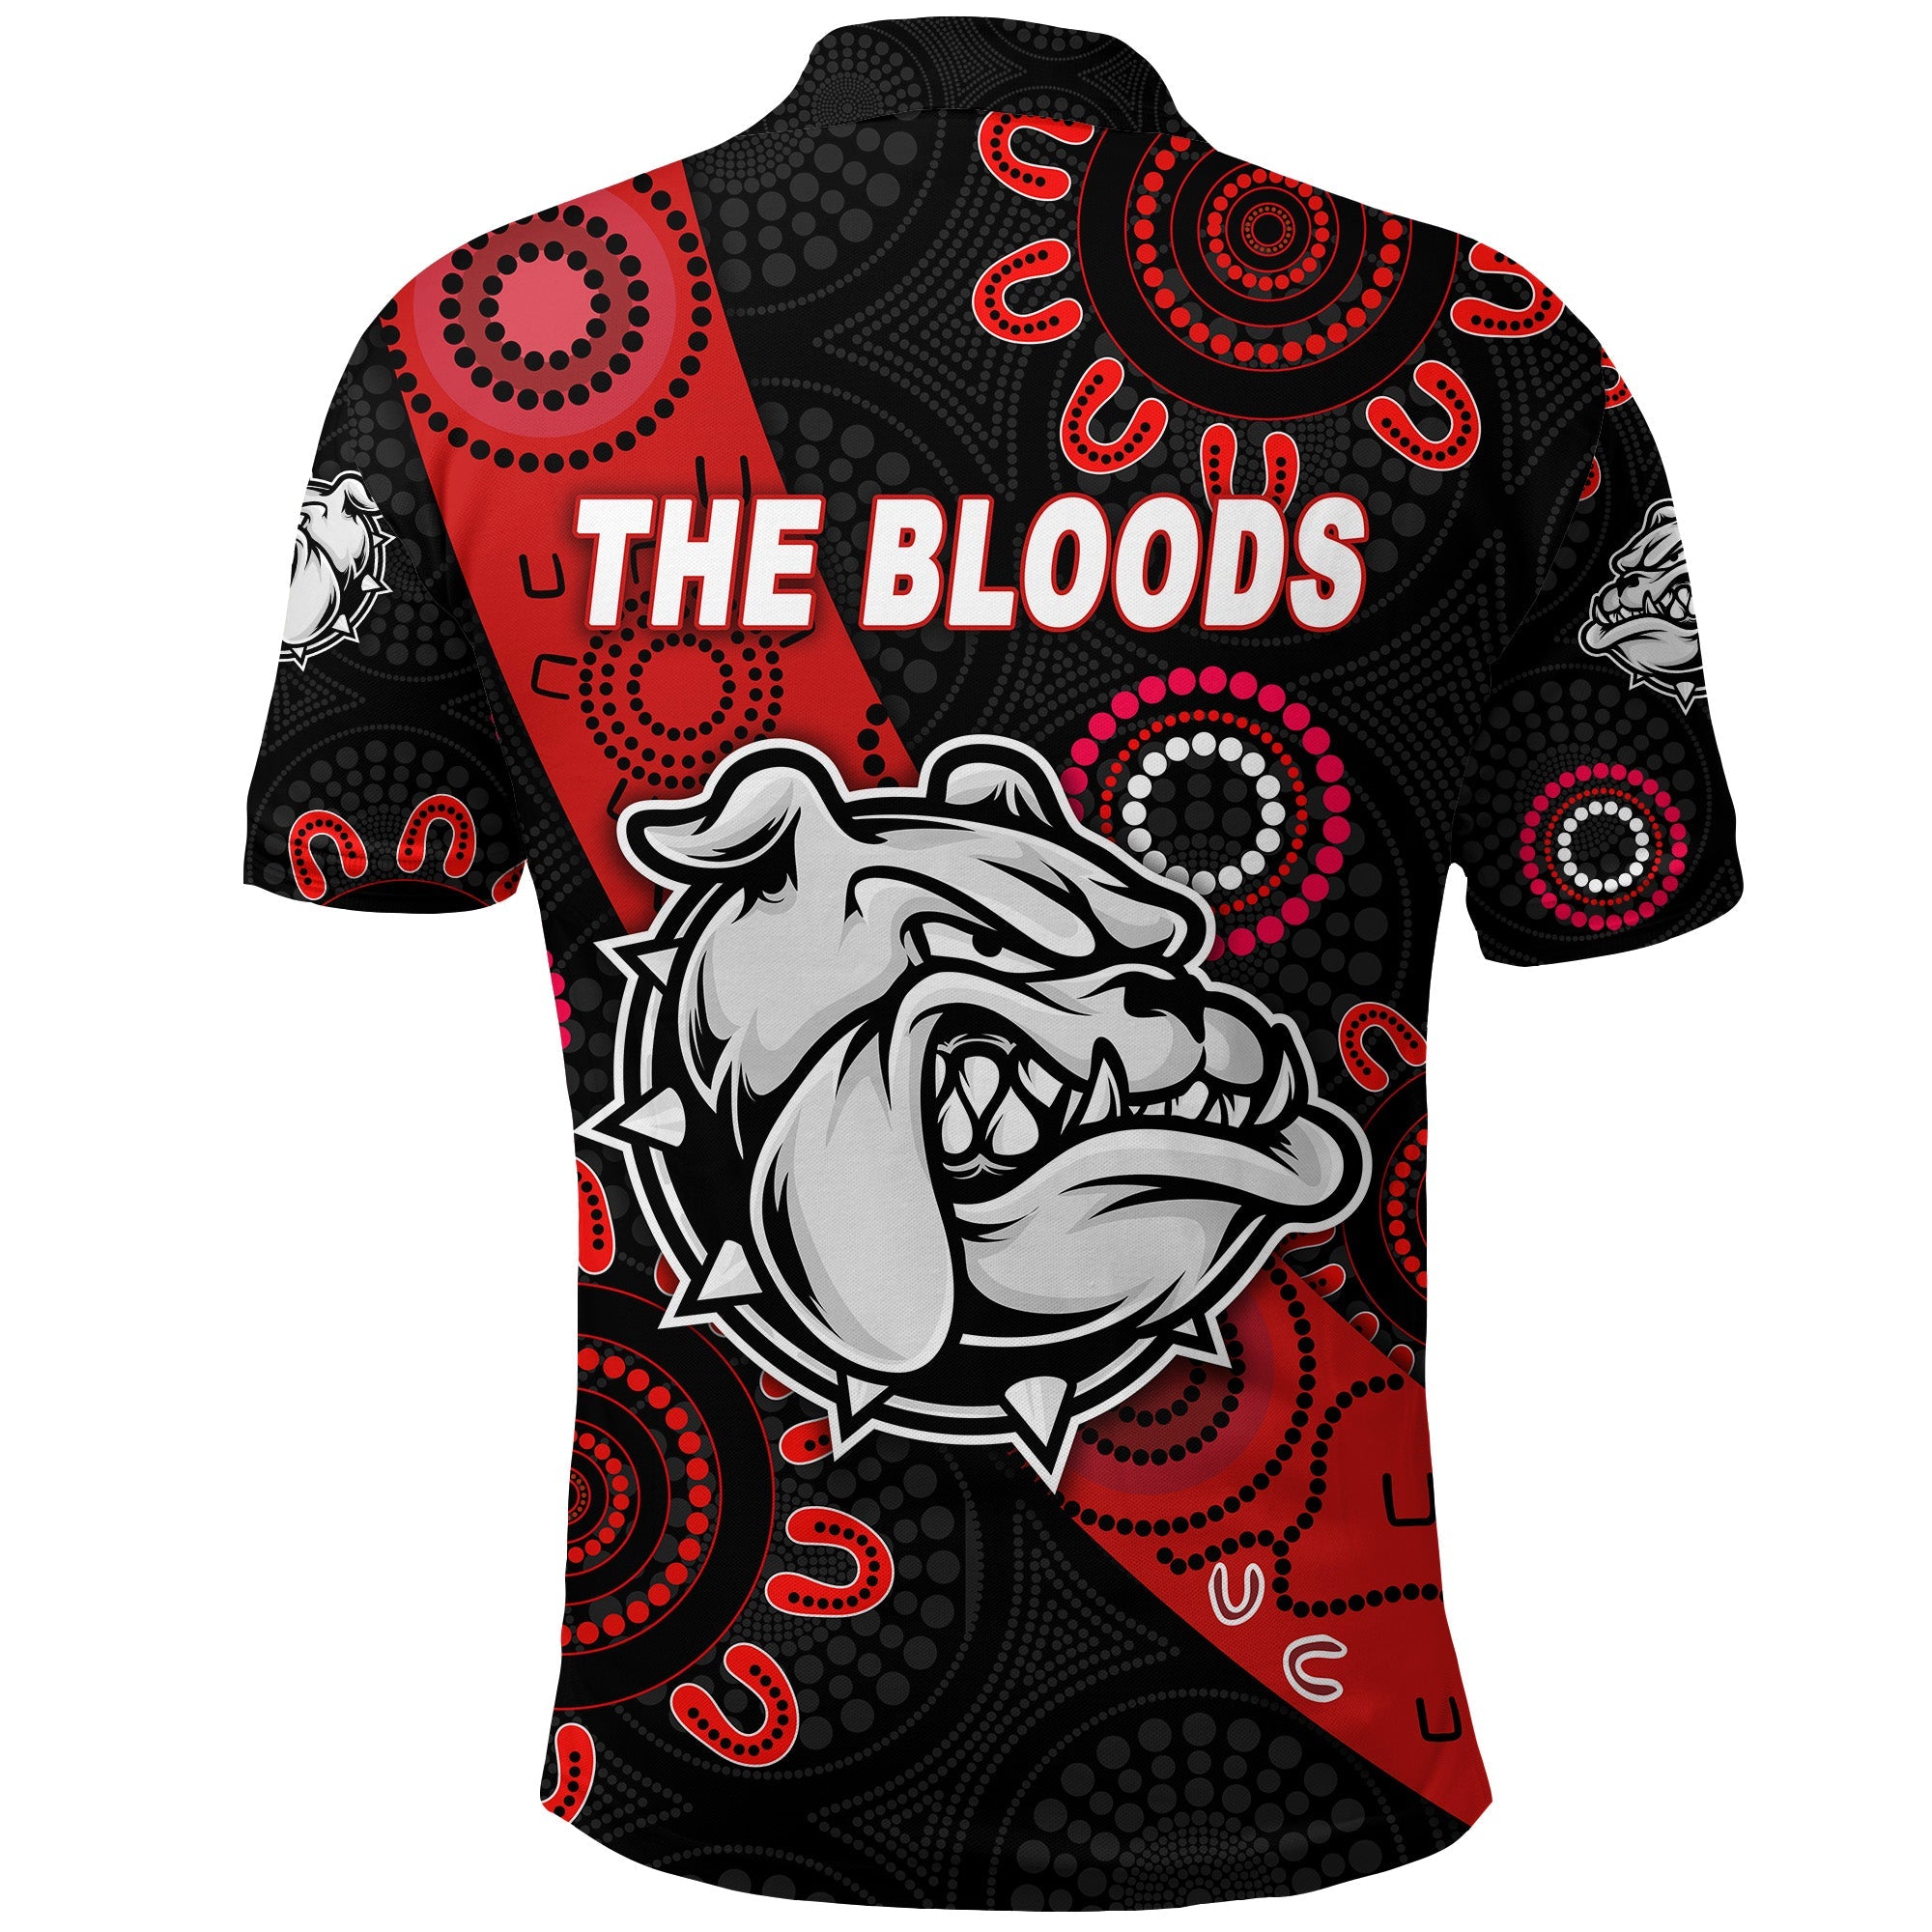 west-football-club-alice-springs-polo-shirt-the-bloods-indigenous-version